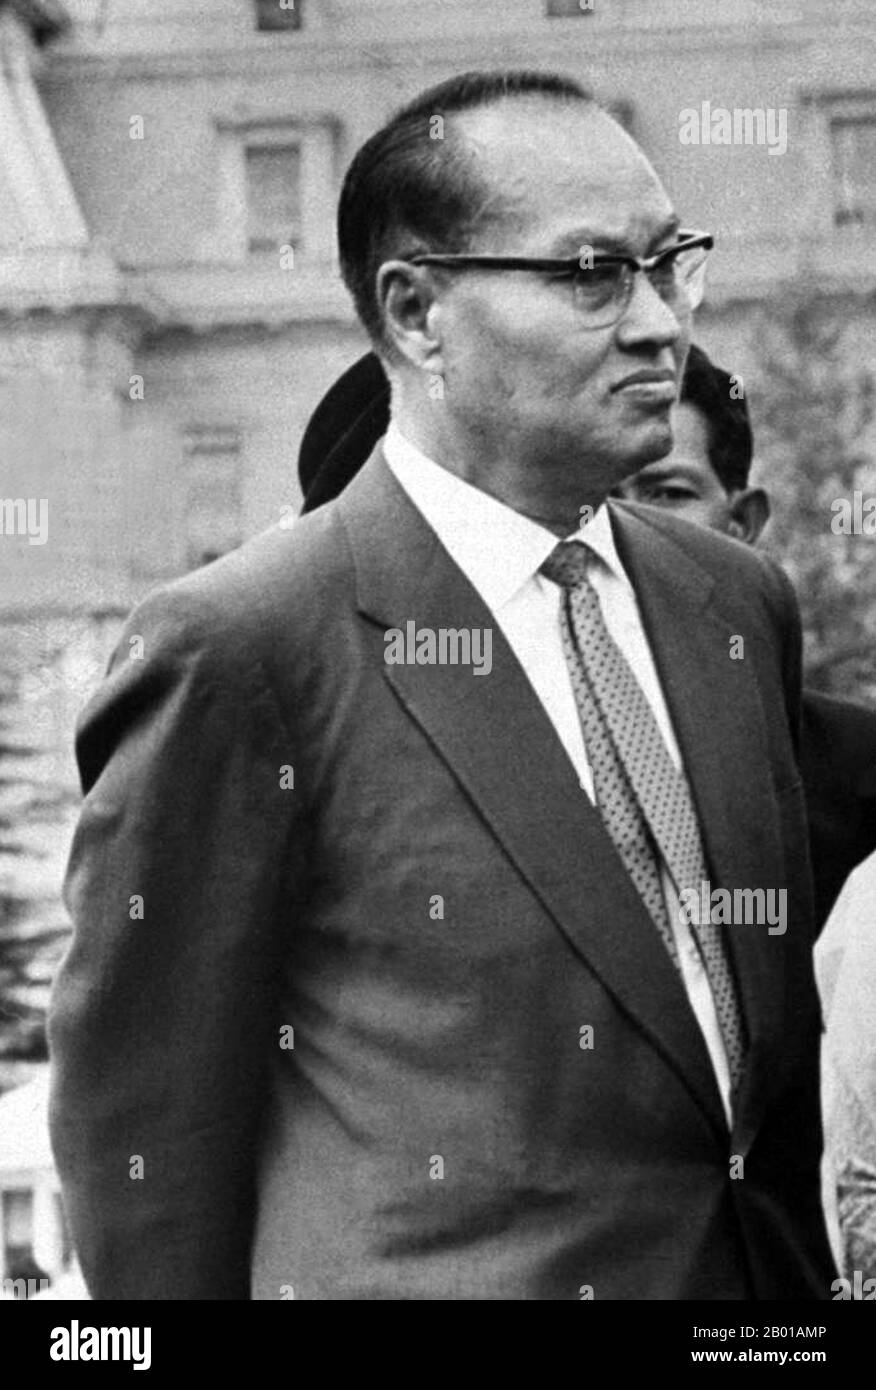 Ne Win (born on 24 May or 14 May 1911 or 10 July 1910 – 5 December 2002) was a politician and military commander. He was Prime Minister of Burma from 1958 to 1960 and 1962 to 1974 and also head of state from 1962 to 1981. He also was the founder and from 1963 to 1988 the chairman of the Burma Socialist Programme Party, which from 1964 until 1988 was the sole political party in the Burmese nation state. Stock Photo